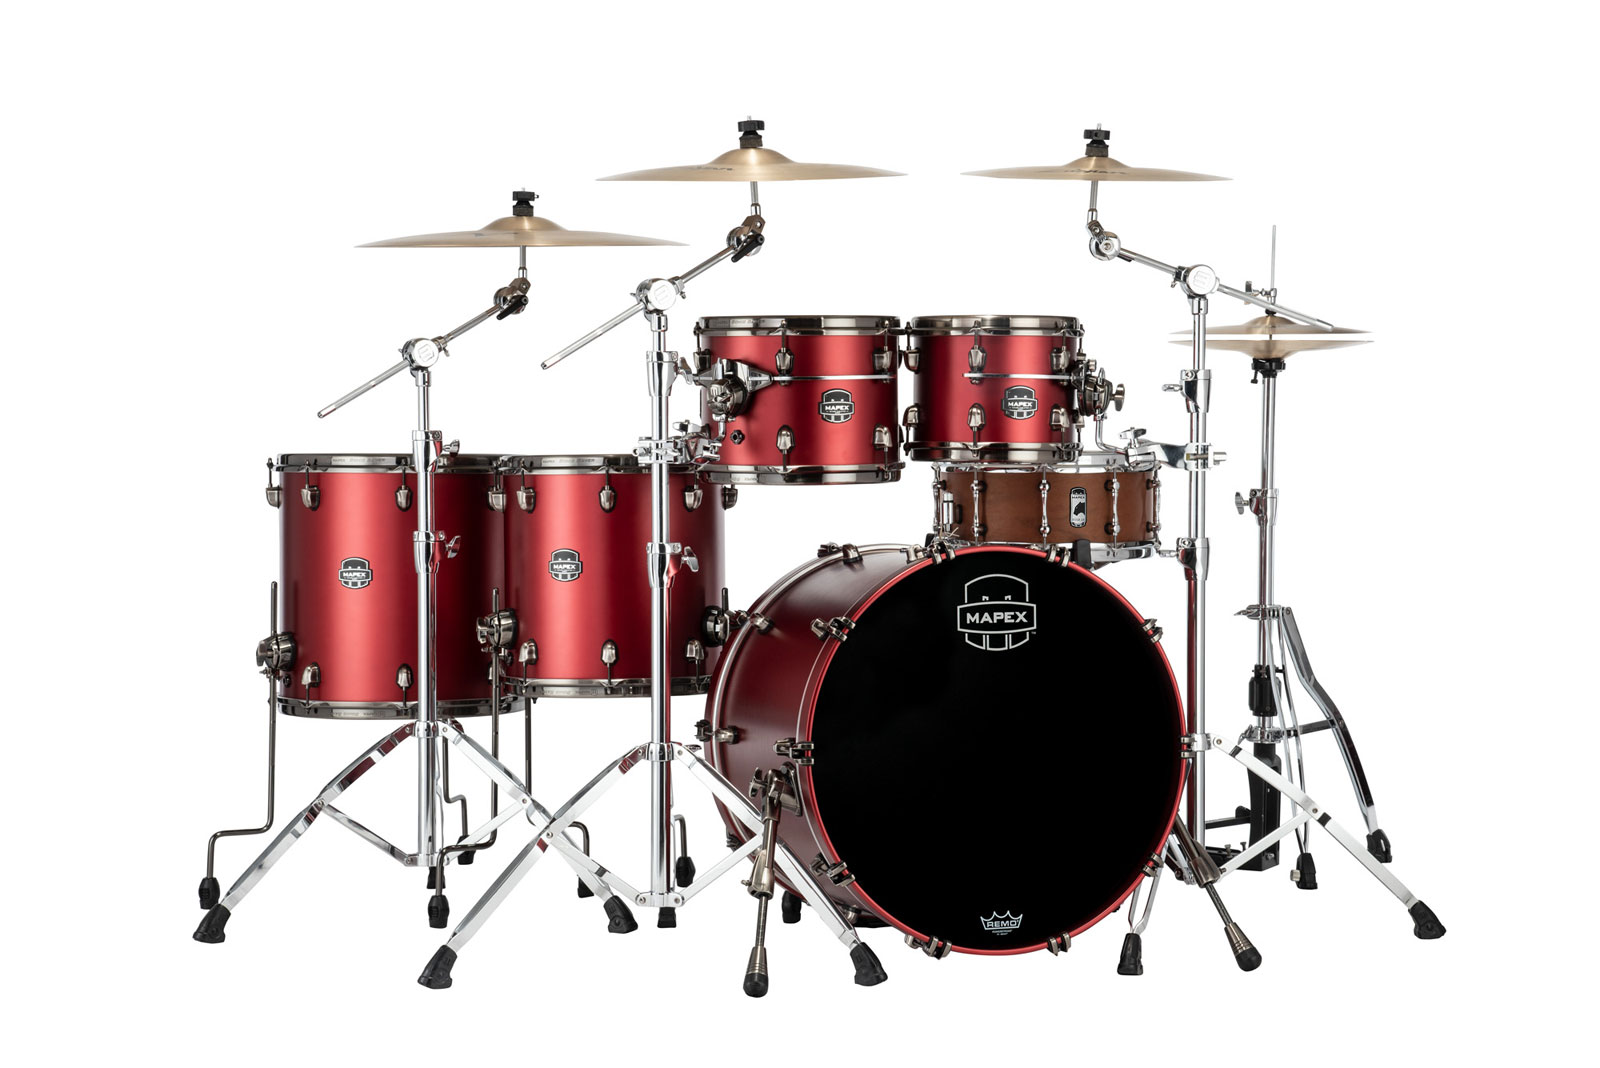 MAPEX SATURN EVO 5 DRUMS TUSCAN RED